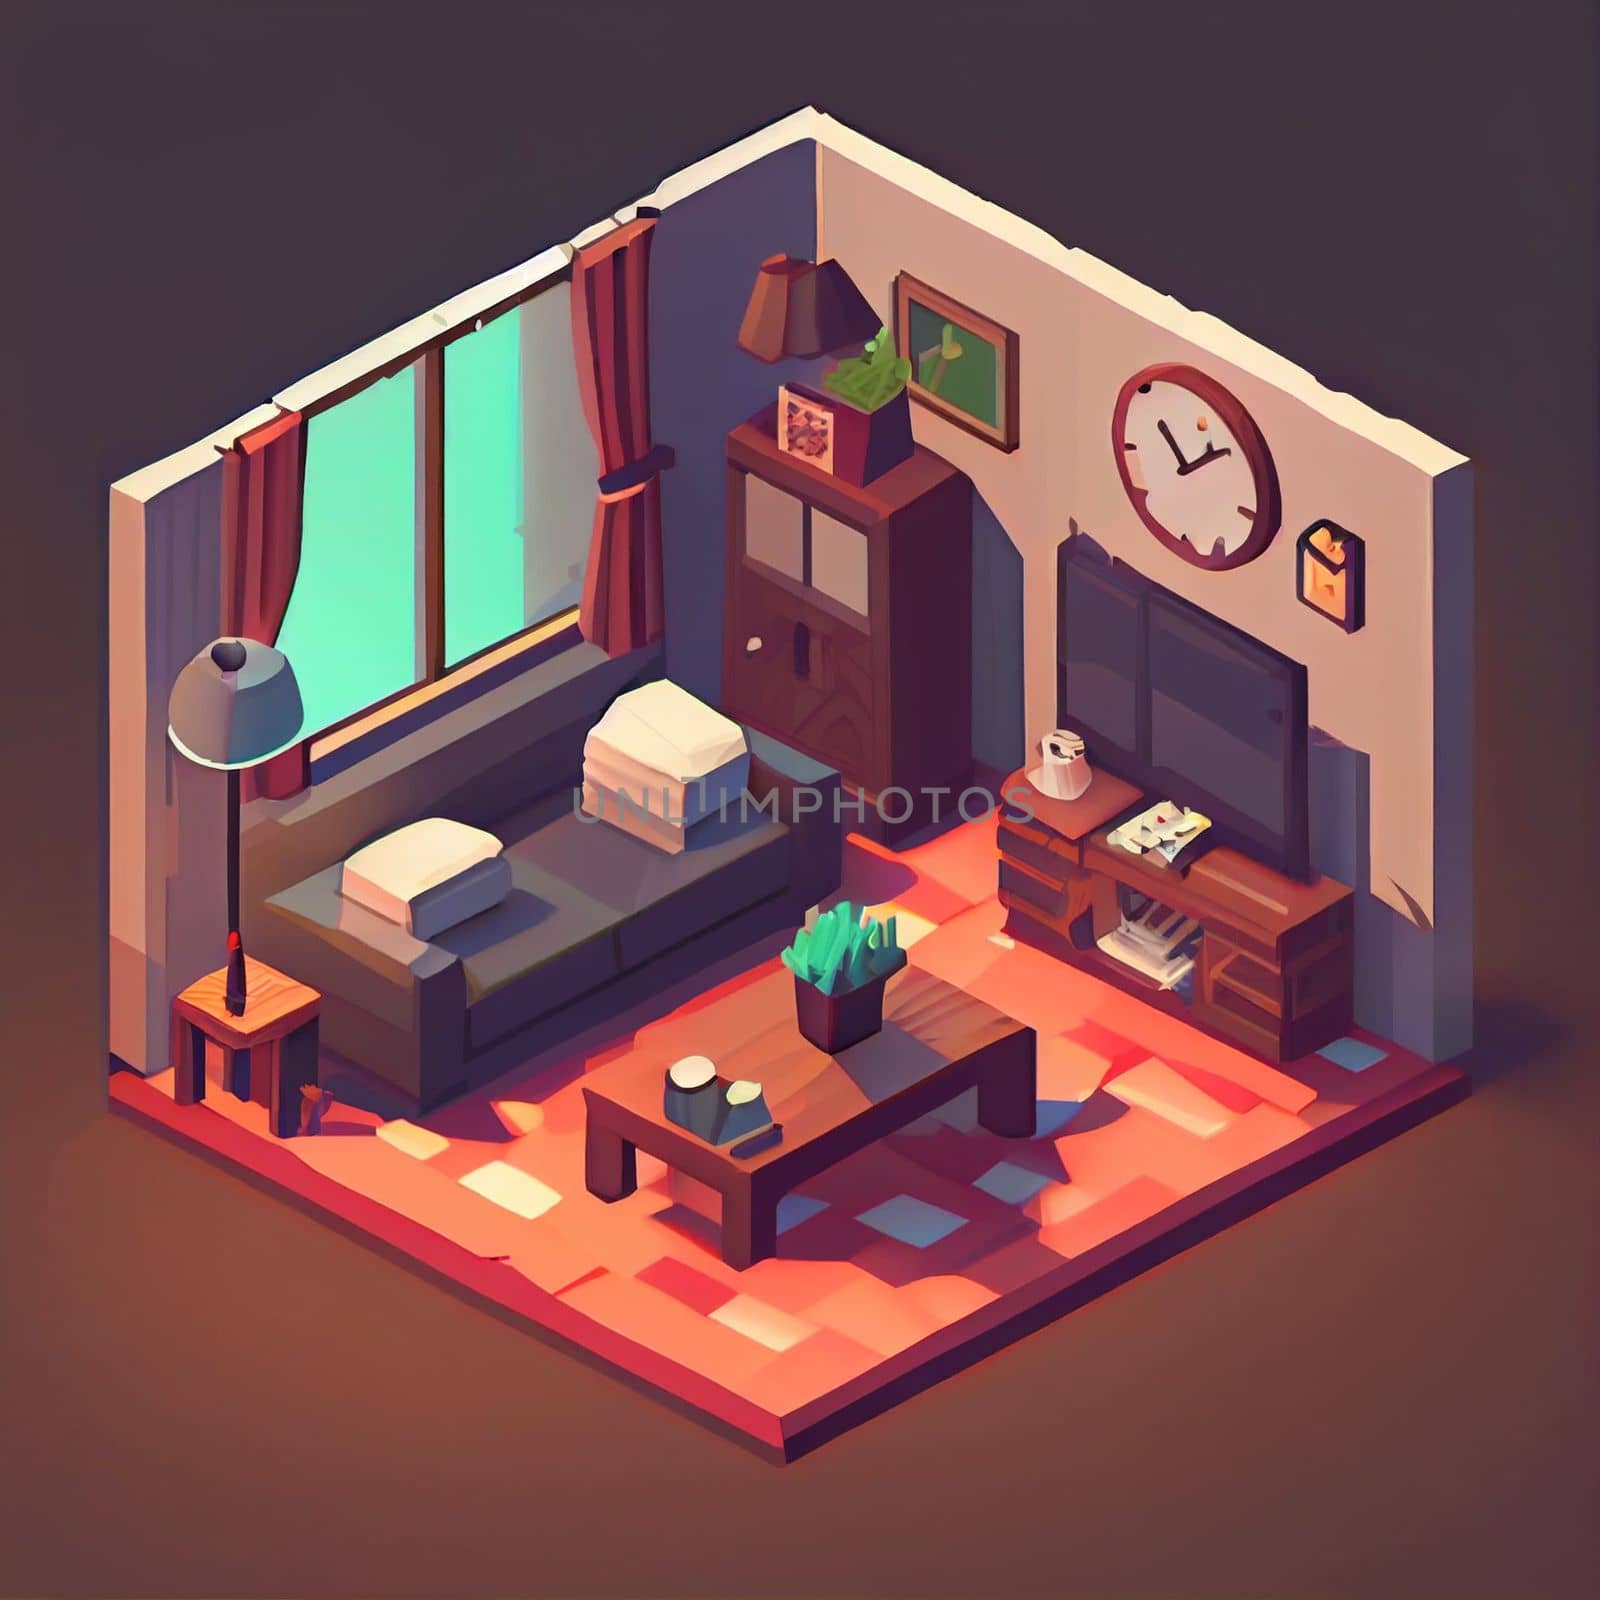 3d illustration isometric interior cute design. Living room includes a lot of voluminous objects and details. by FokasuArt